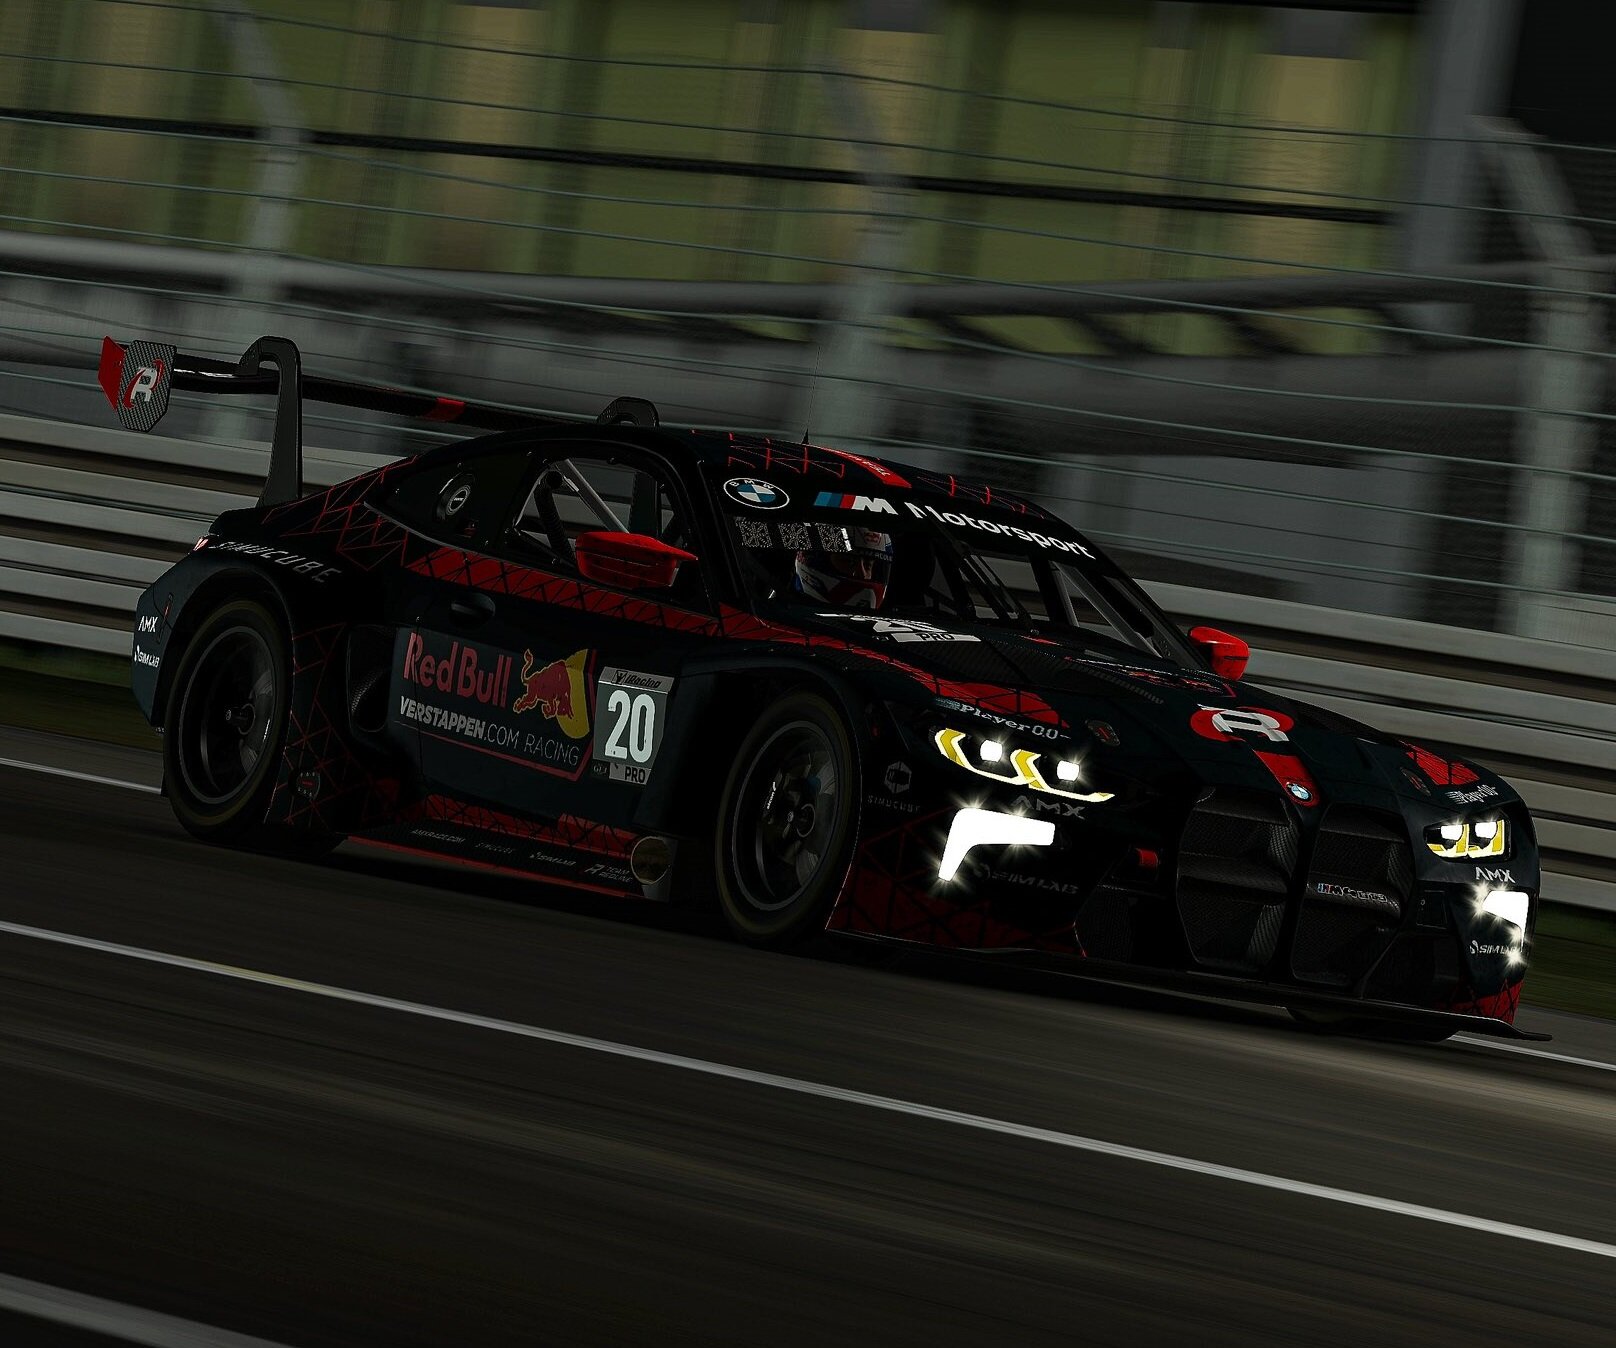 More information about "iRacing 24 Hours Nürburgring [18 maggio ore 14]"